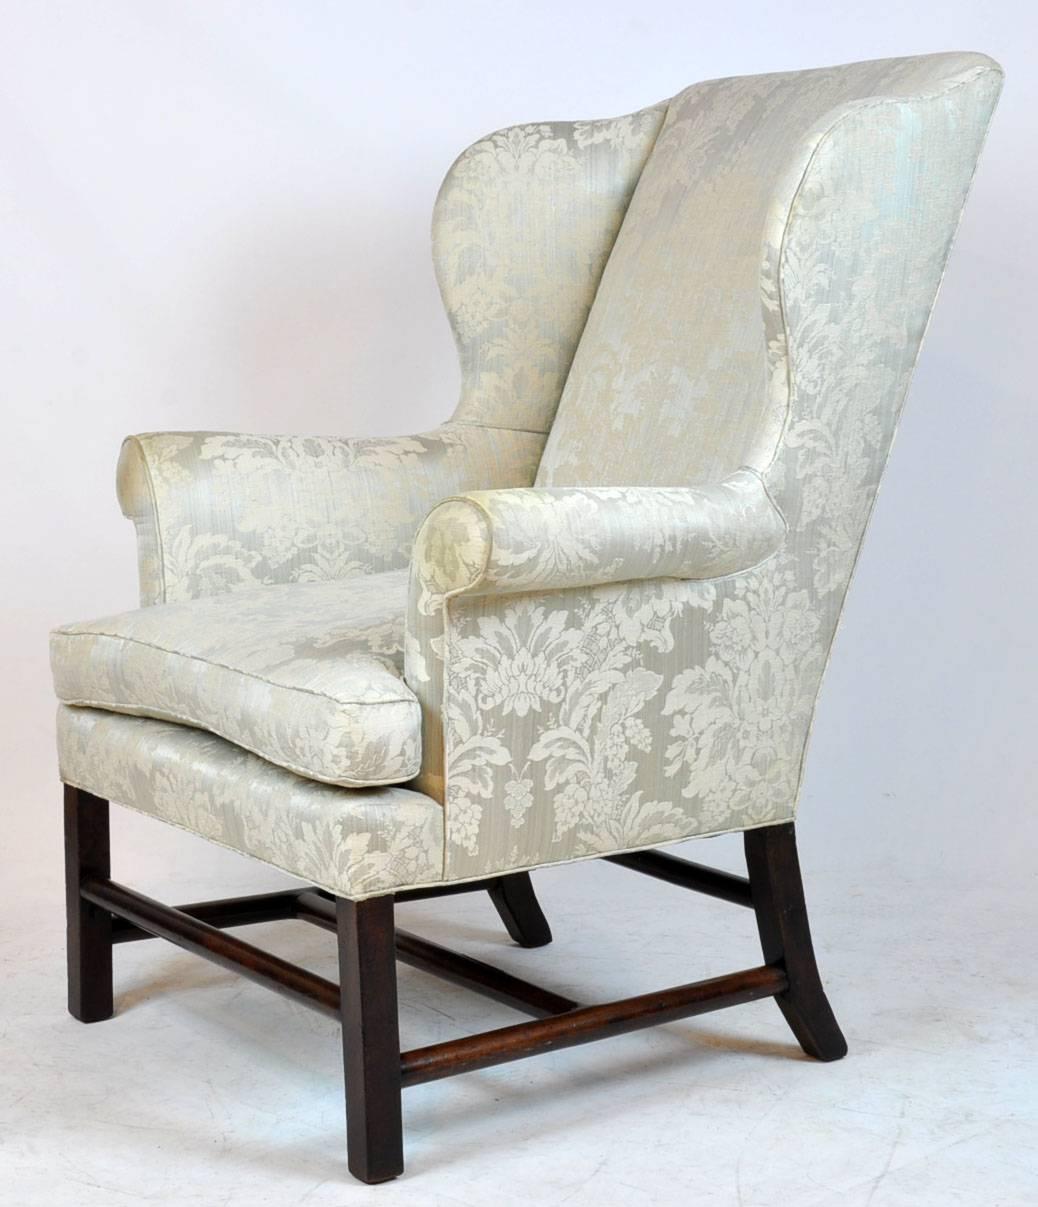 George III Georgian English Rolled Arm Wing Chair with Unusual Turned Stretcher, 1790s